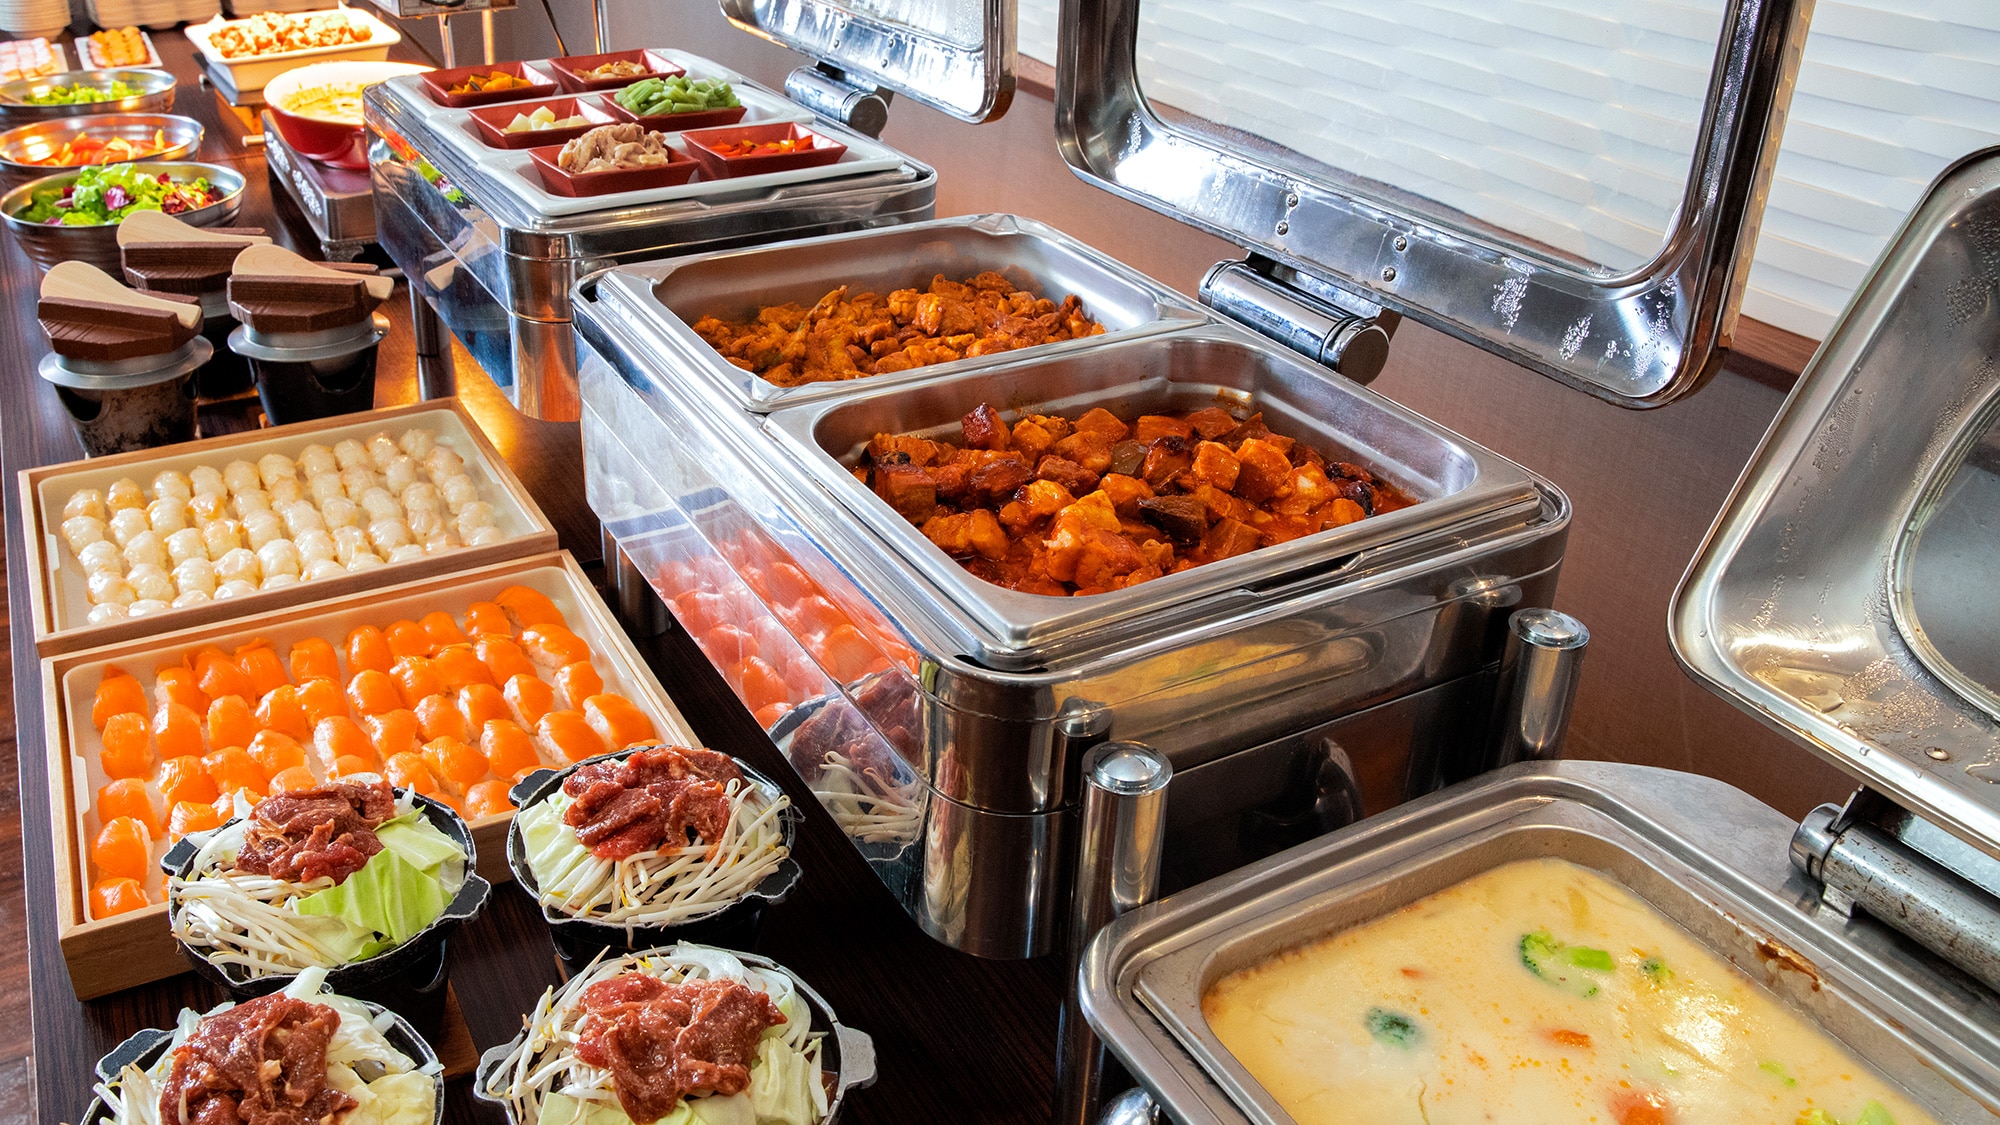 [An example of dinner buffet] We offer a wide variety of creative dishes.